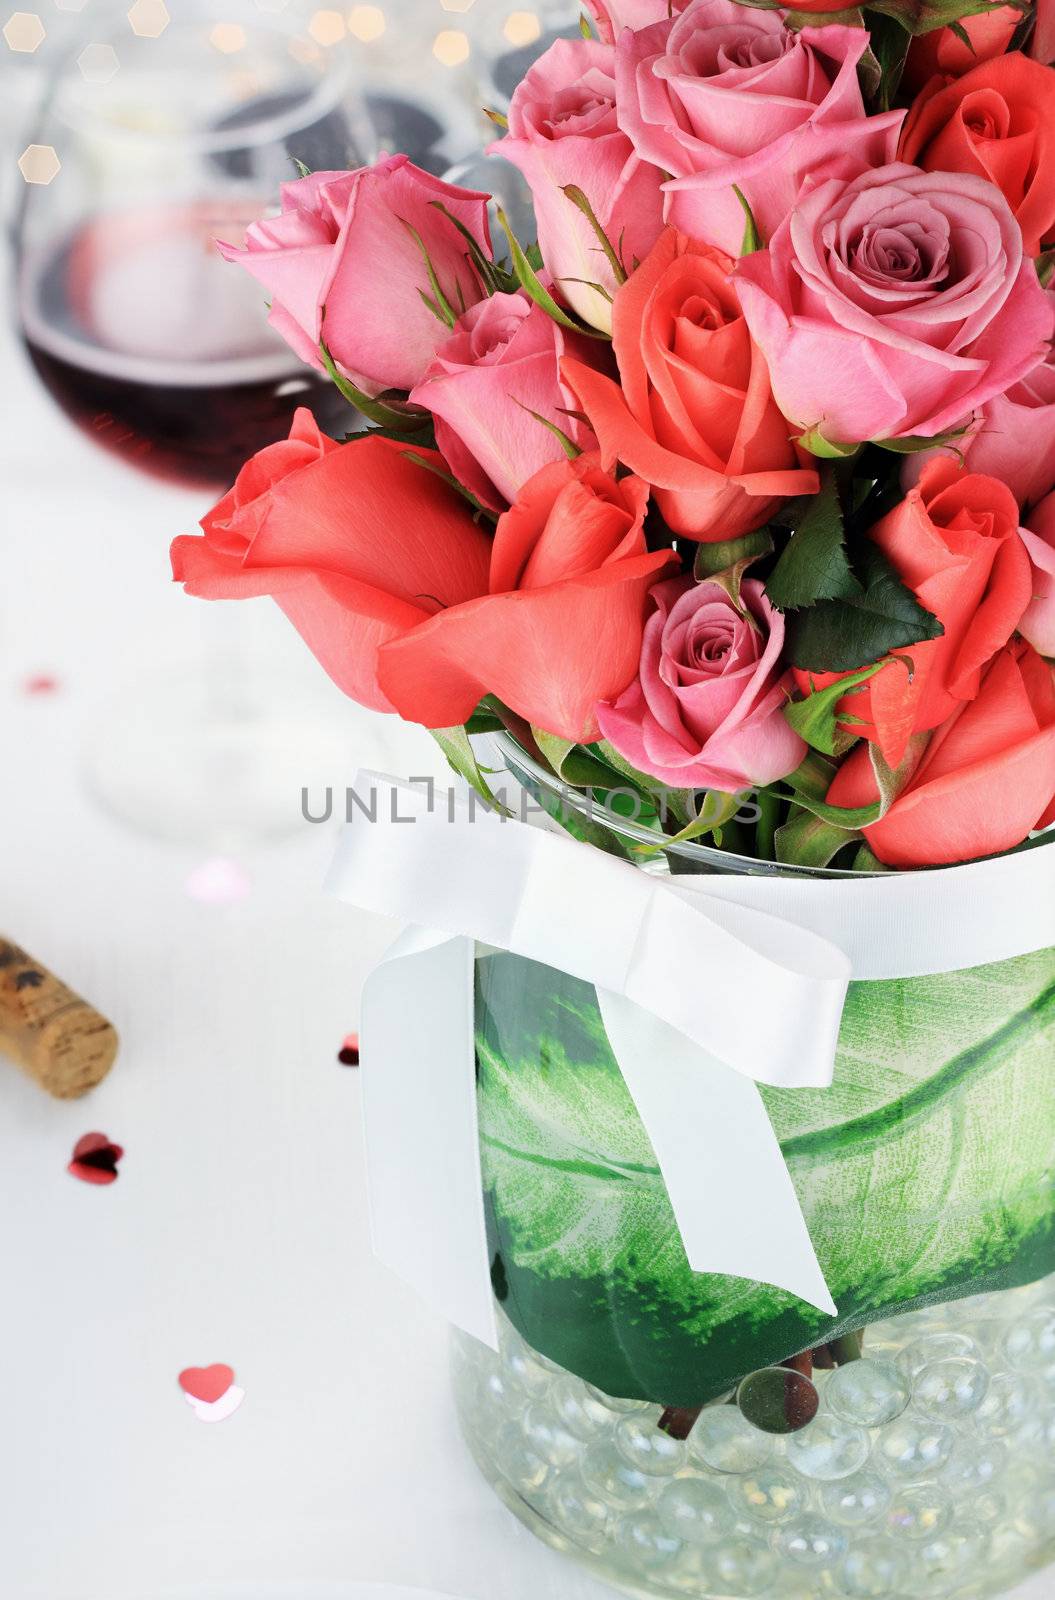 Bouquet of roses against a romantic table setting. Selective focus on roses blossoms with blur on lower portion of image.